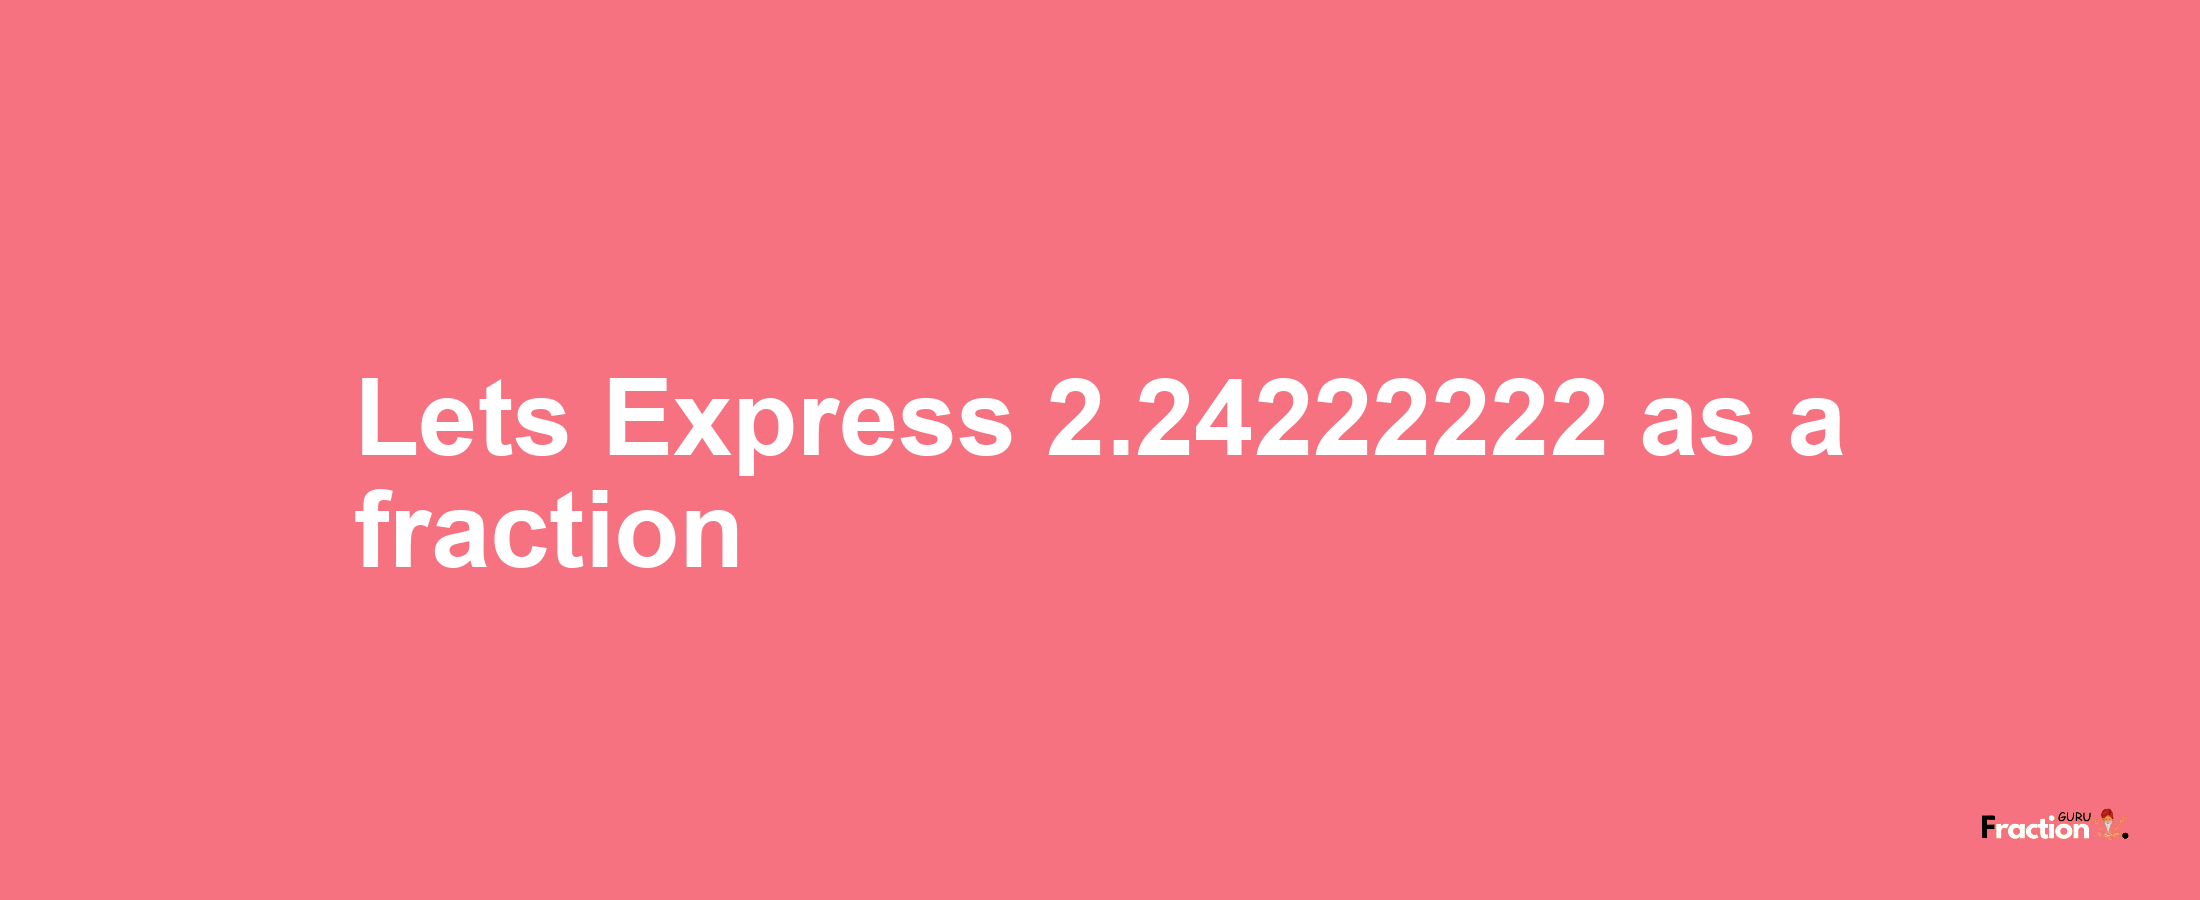 Lets Express 2.24222222 as afraction